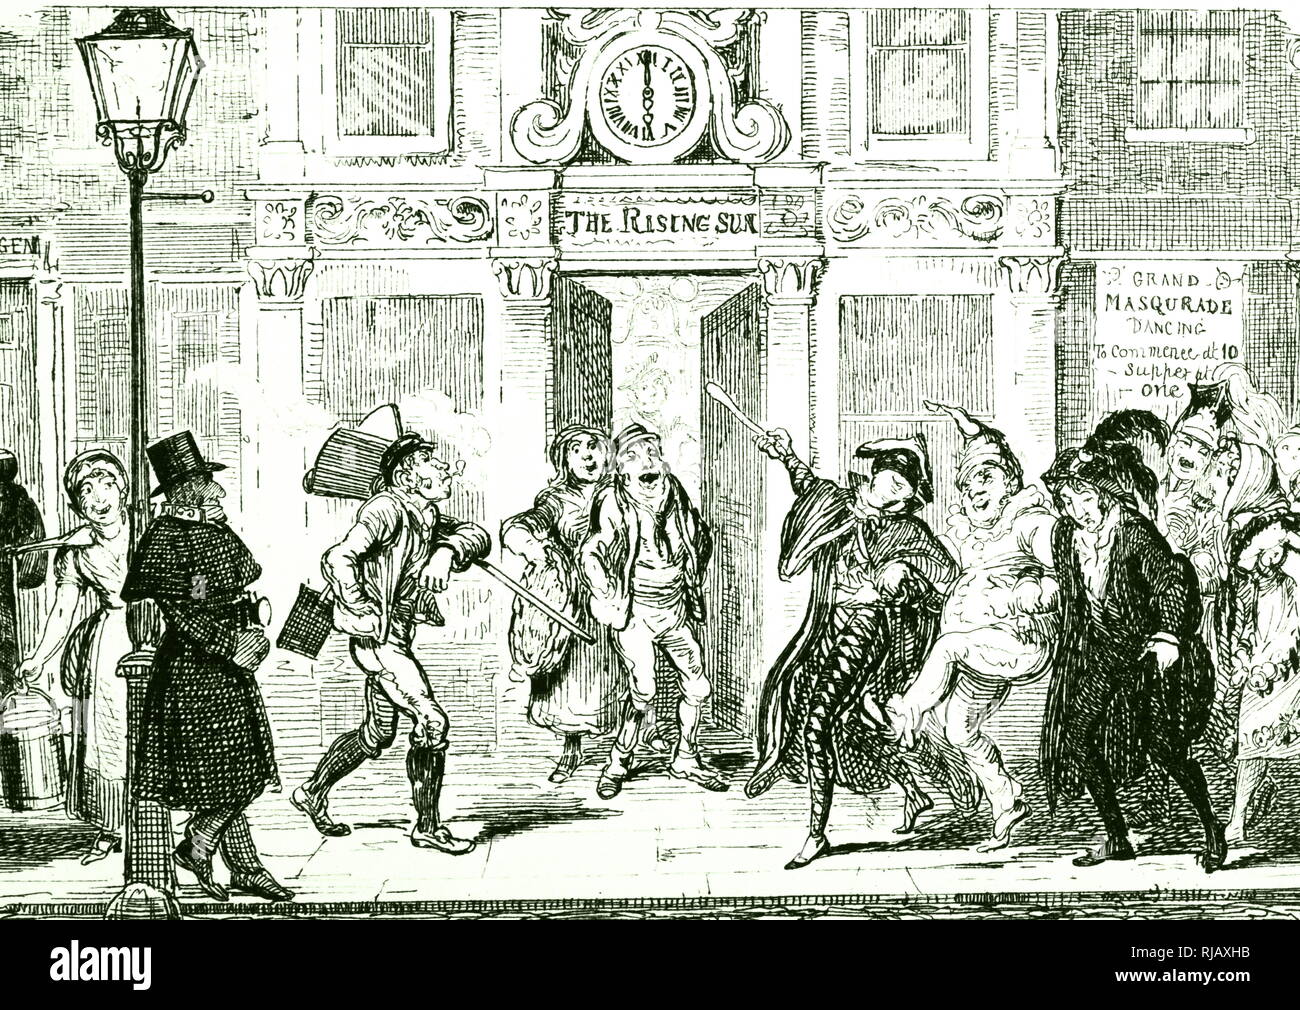 A cartoon depicting a London street scene with revellers returning home as the labouring classes start their workday. Illustrated by George Cruikshank (1792-1878) a British caricaturist and book illustrator. Dated 19th Century Stock Photo